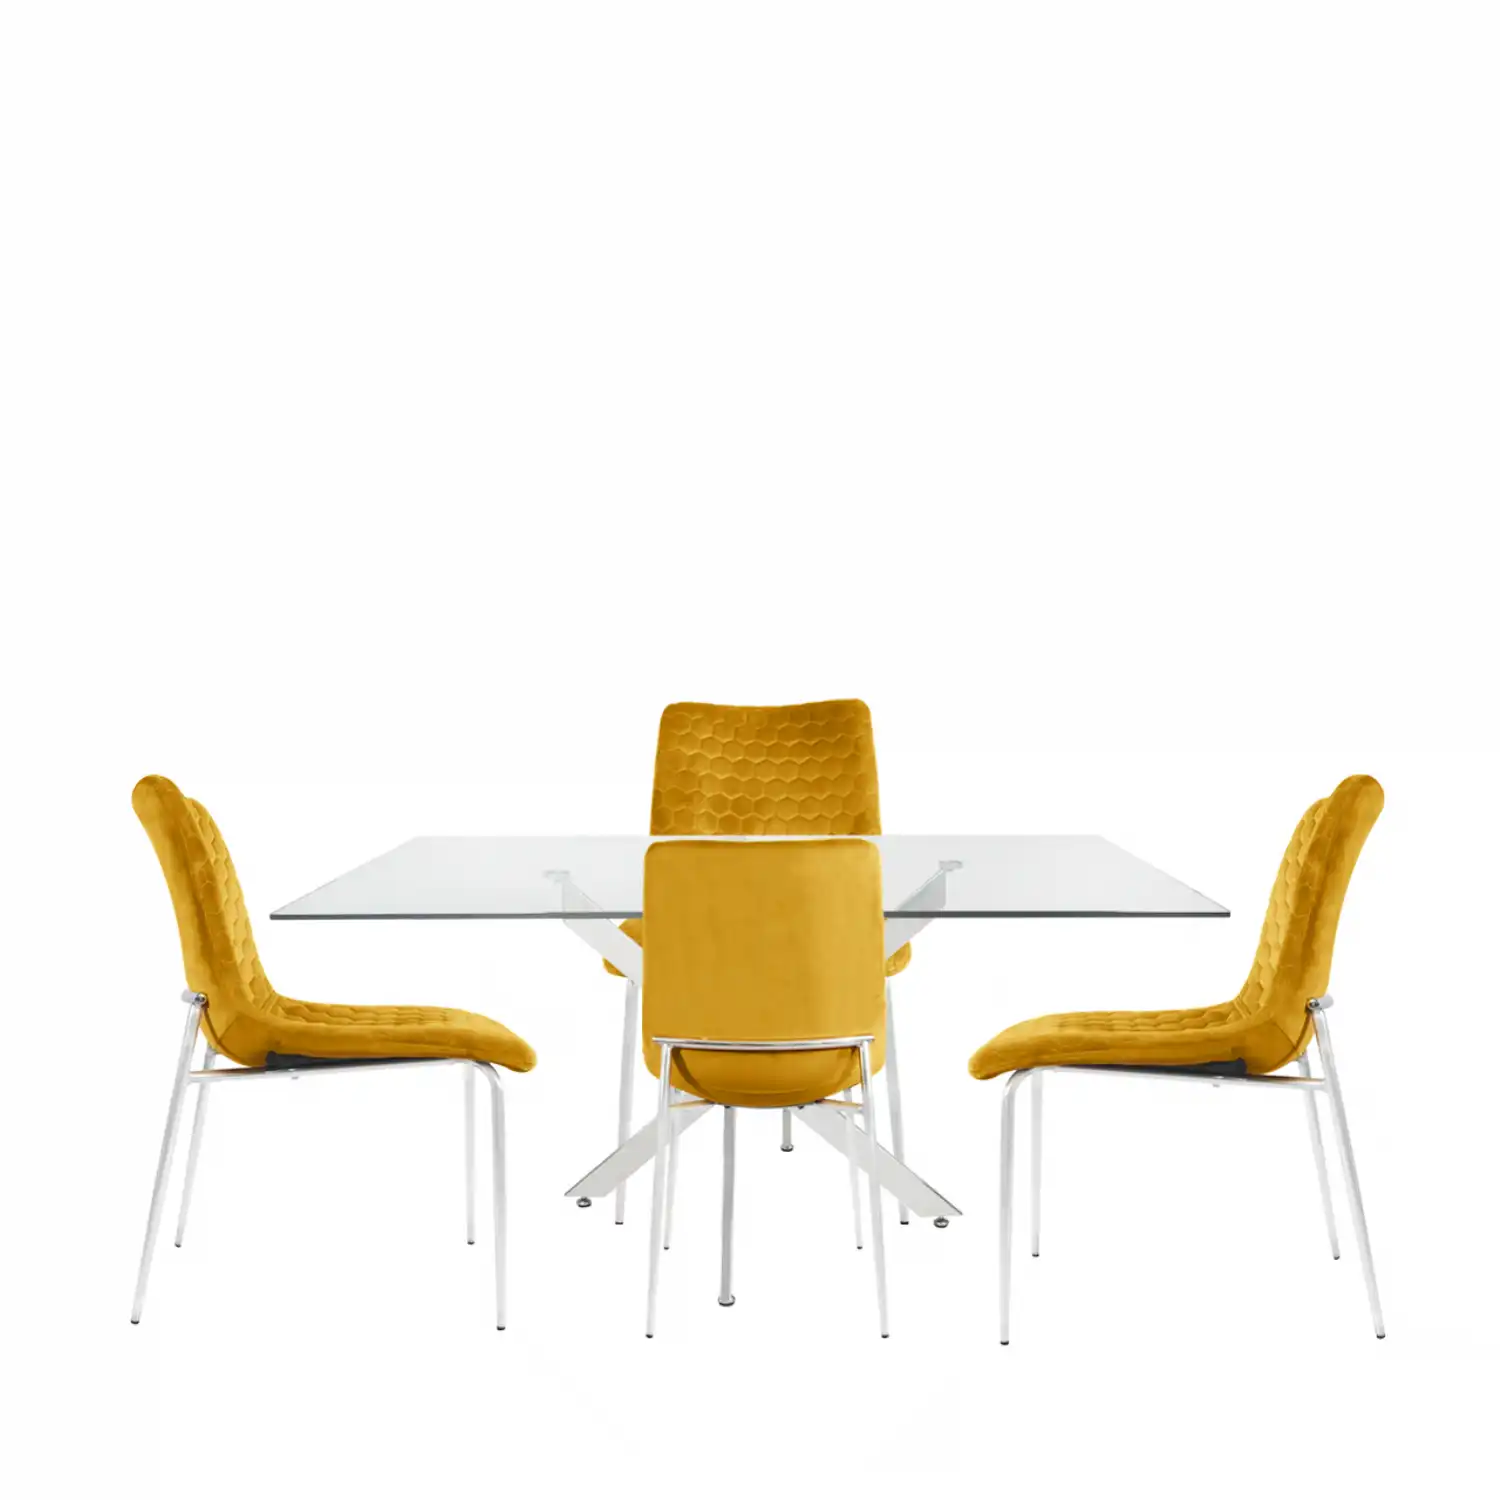 160cm Rectangular Dining Table And 4 Mustard Chairs